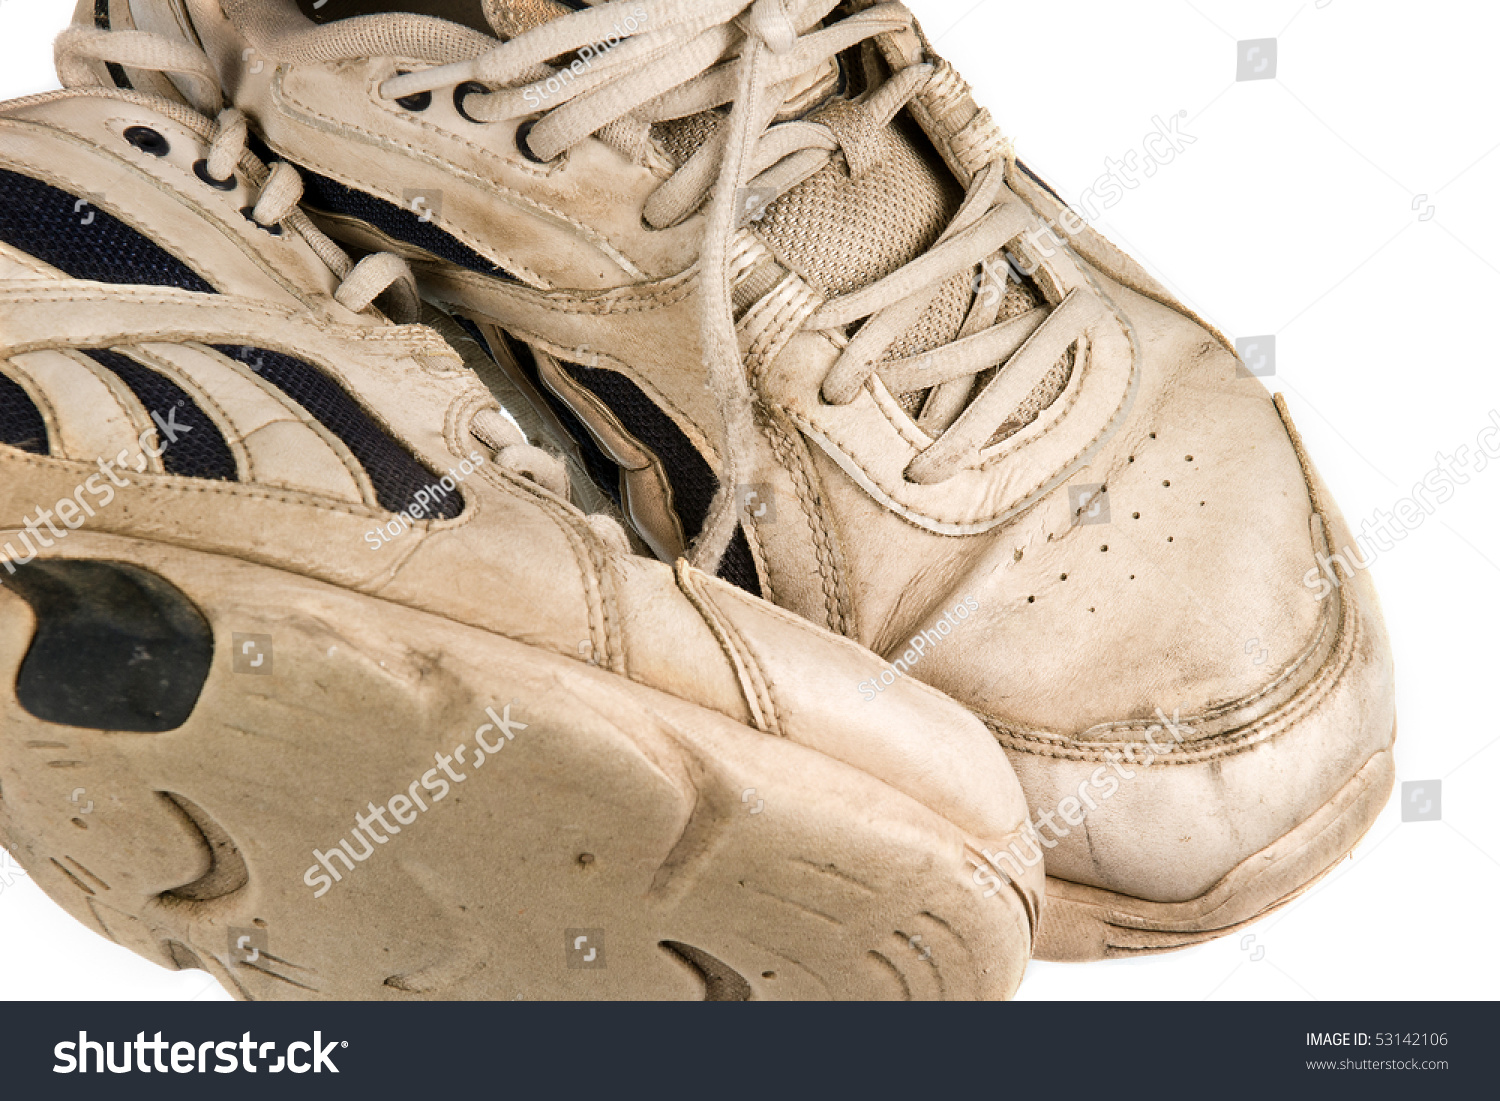 Worn Out Sneakers Isolated On White Stock Photo 53142106 - Shutterstock